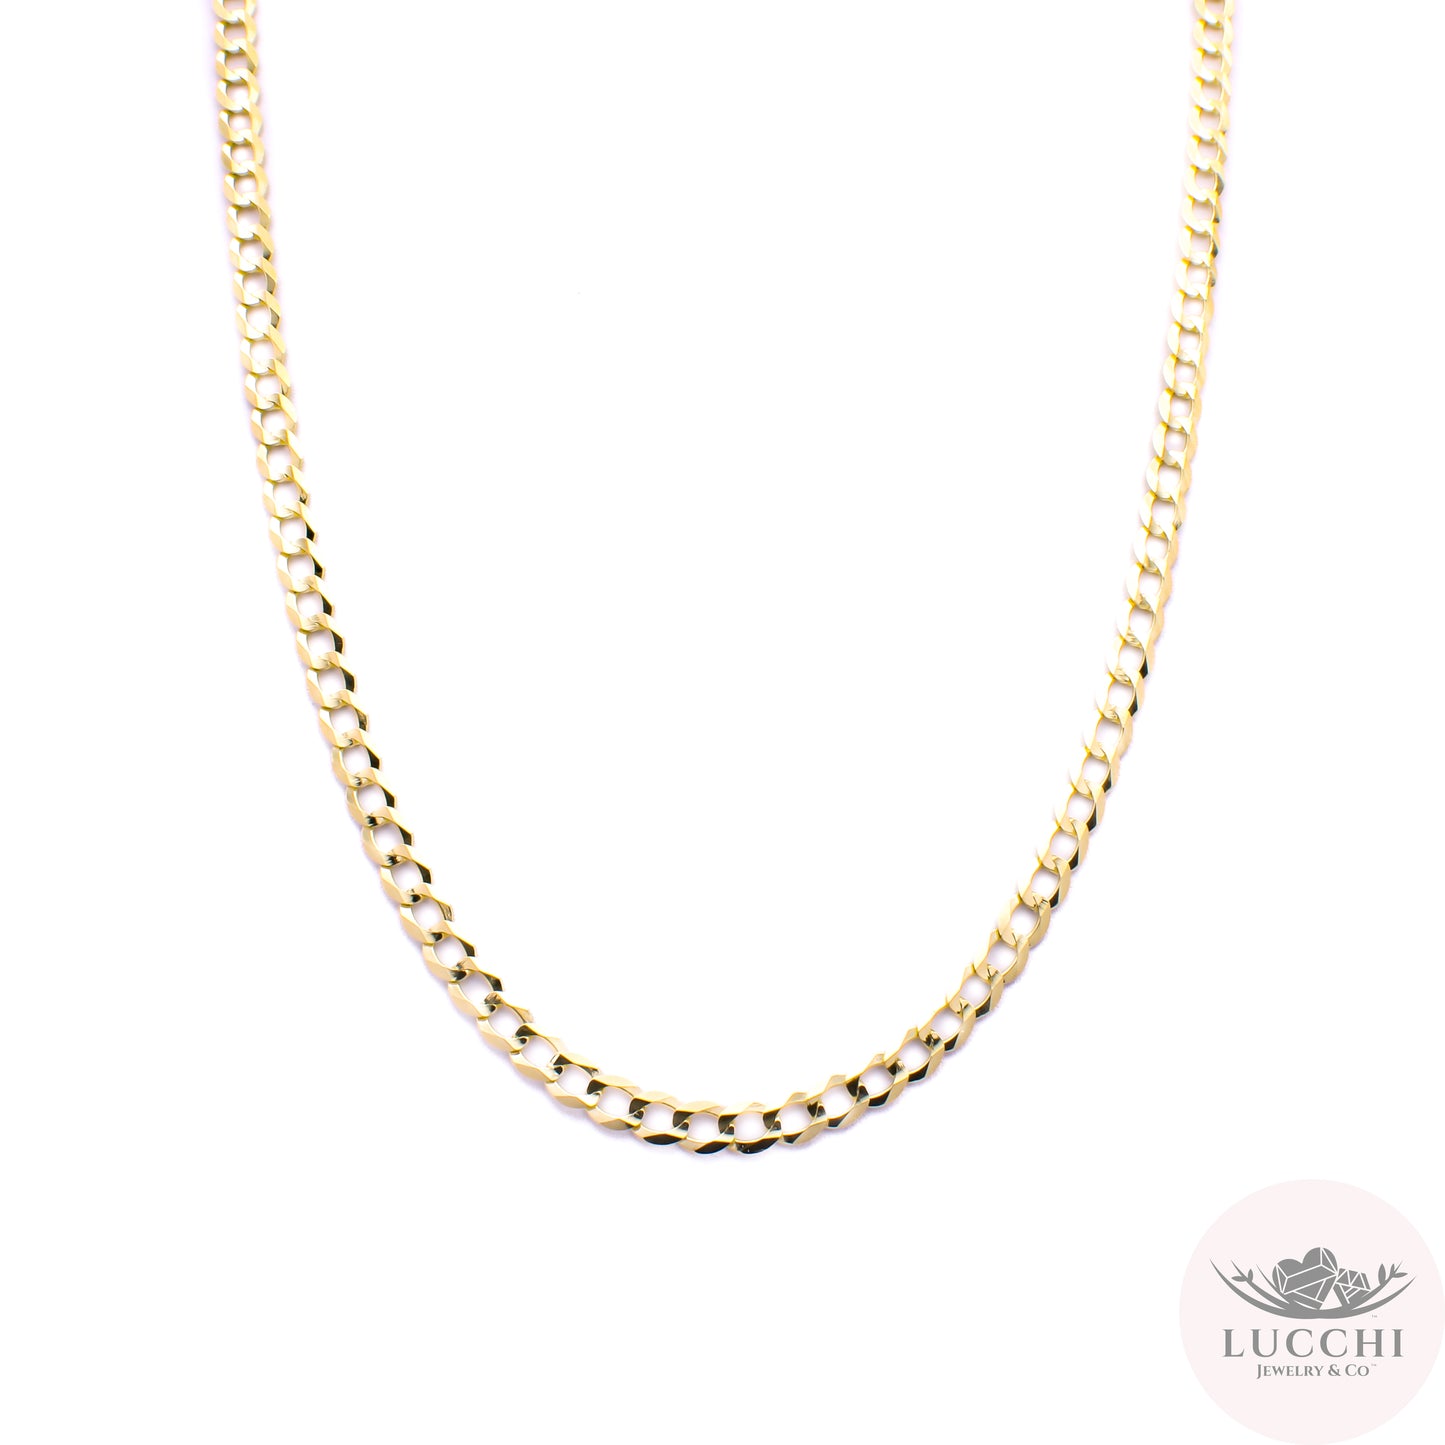 20" Curb Chain Necklace - 4mm - 14k